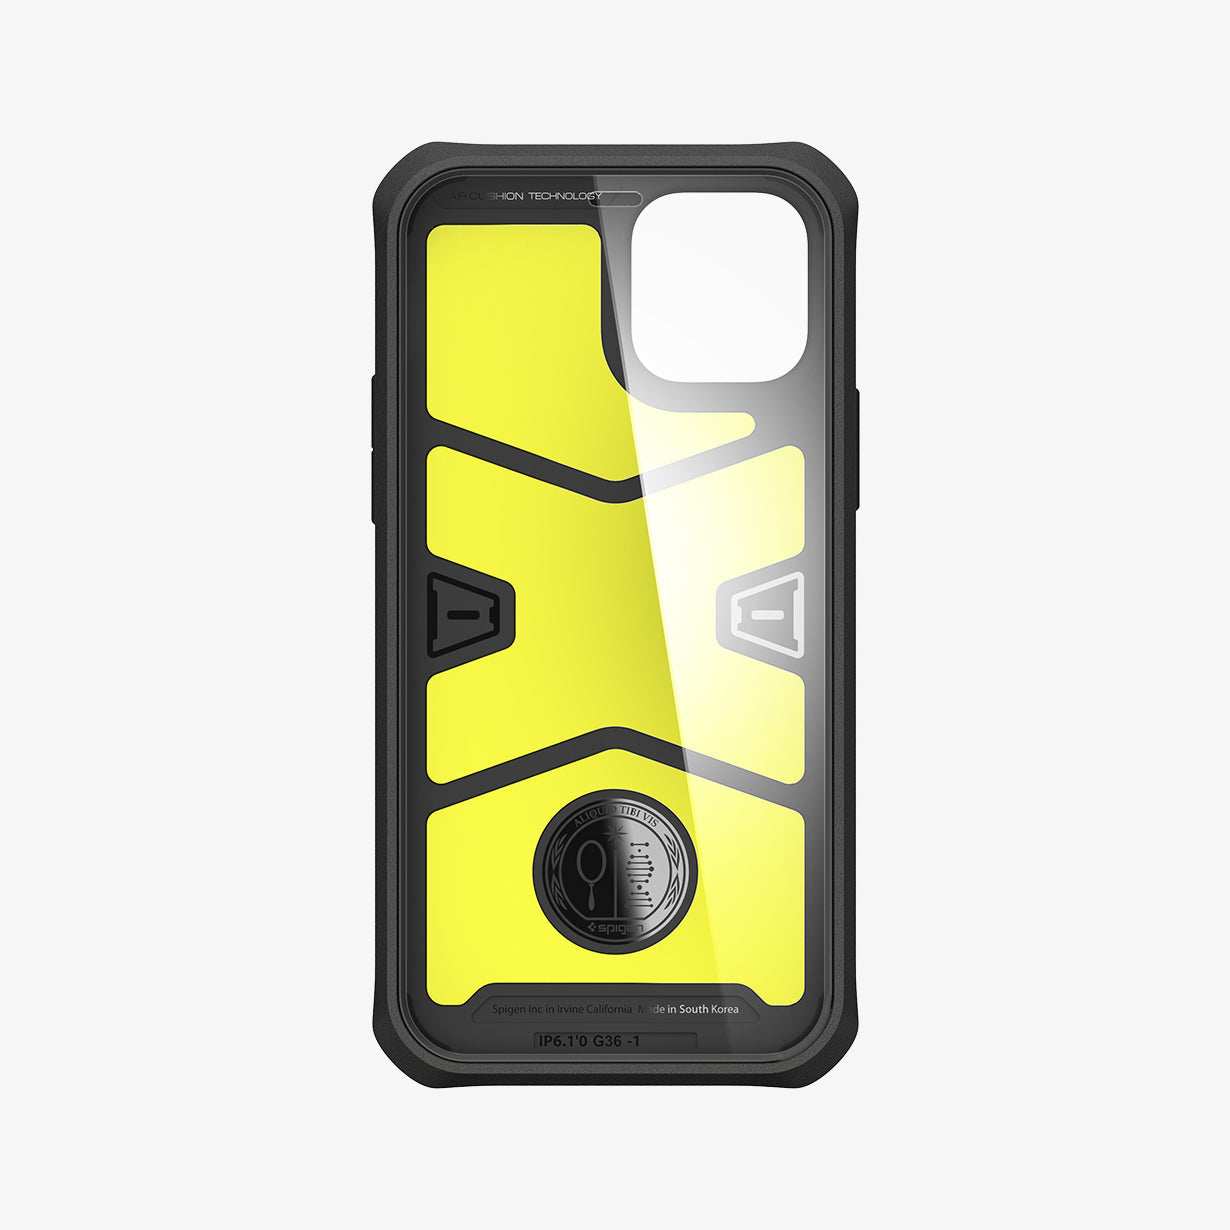 ACS02951 - iPhone 12 / iPhone 12 Pro Case Geo Armor 360 in black showing the inside of case